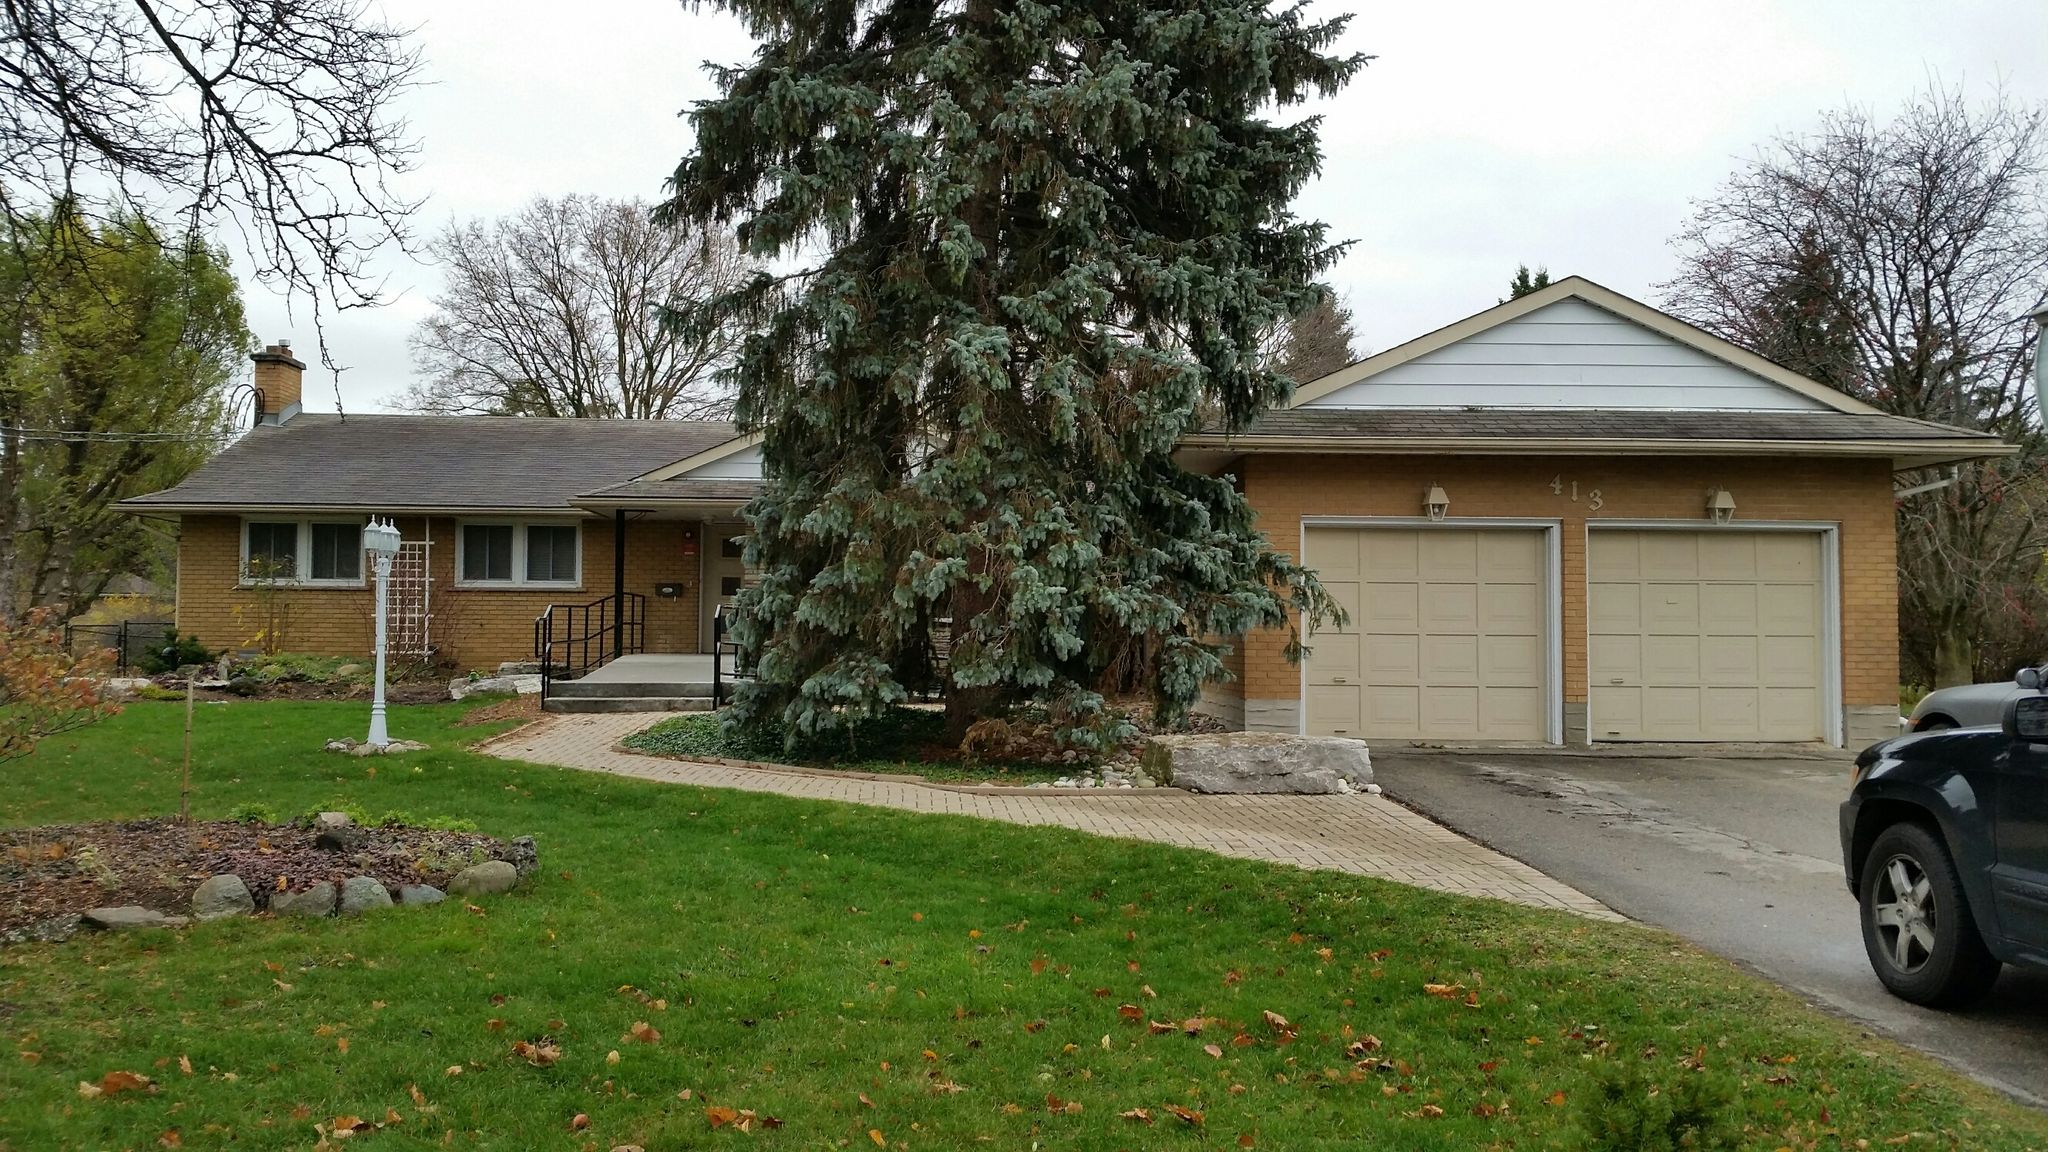 Forestlawn Home – Waterloo – 5 adults served with 24 hour support